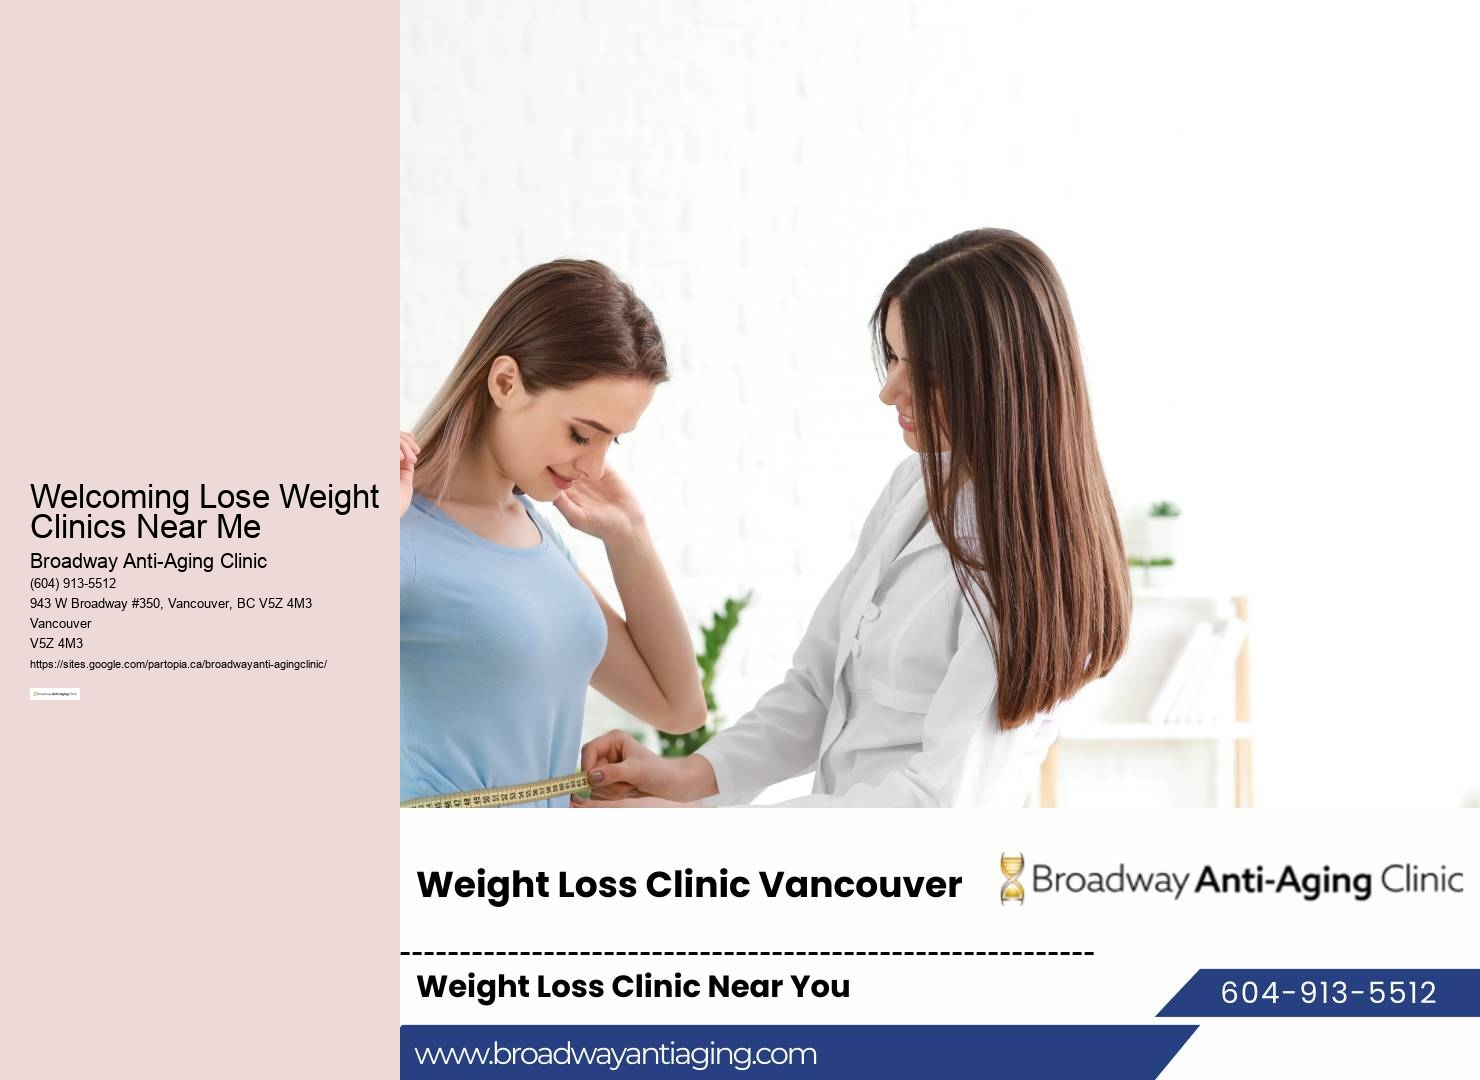 Welcoming Lose Weight Clinics Near Me